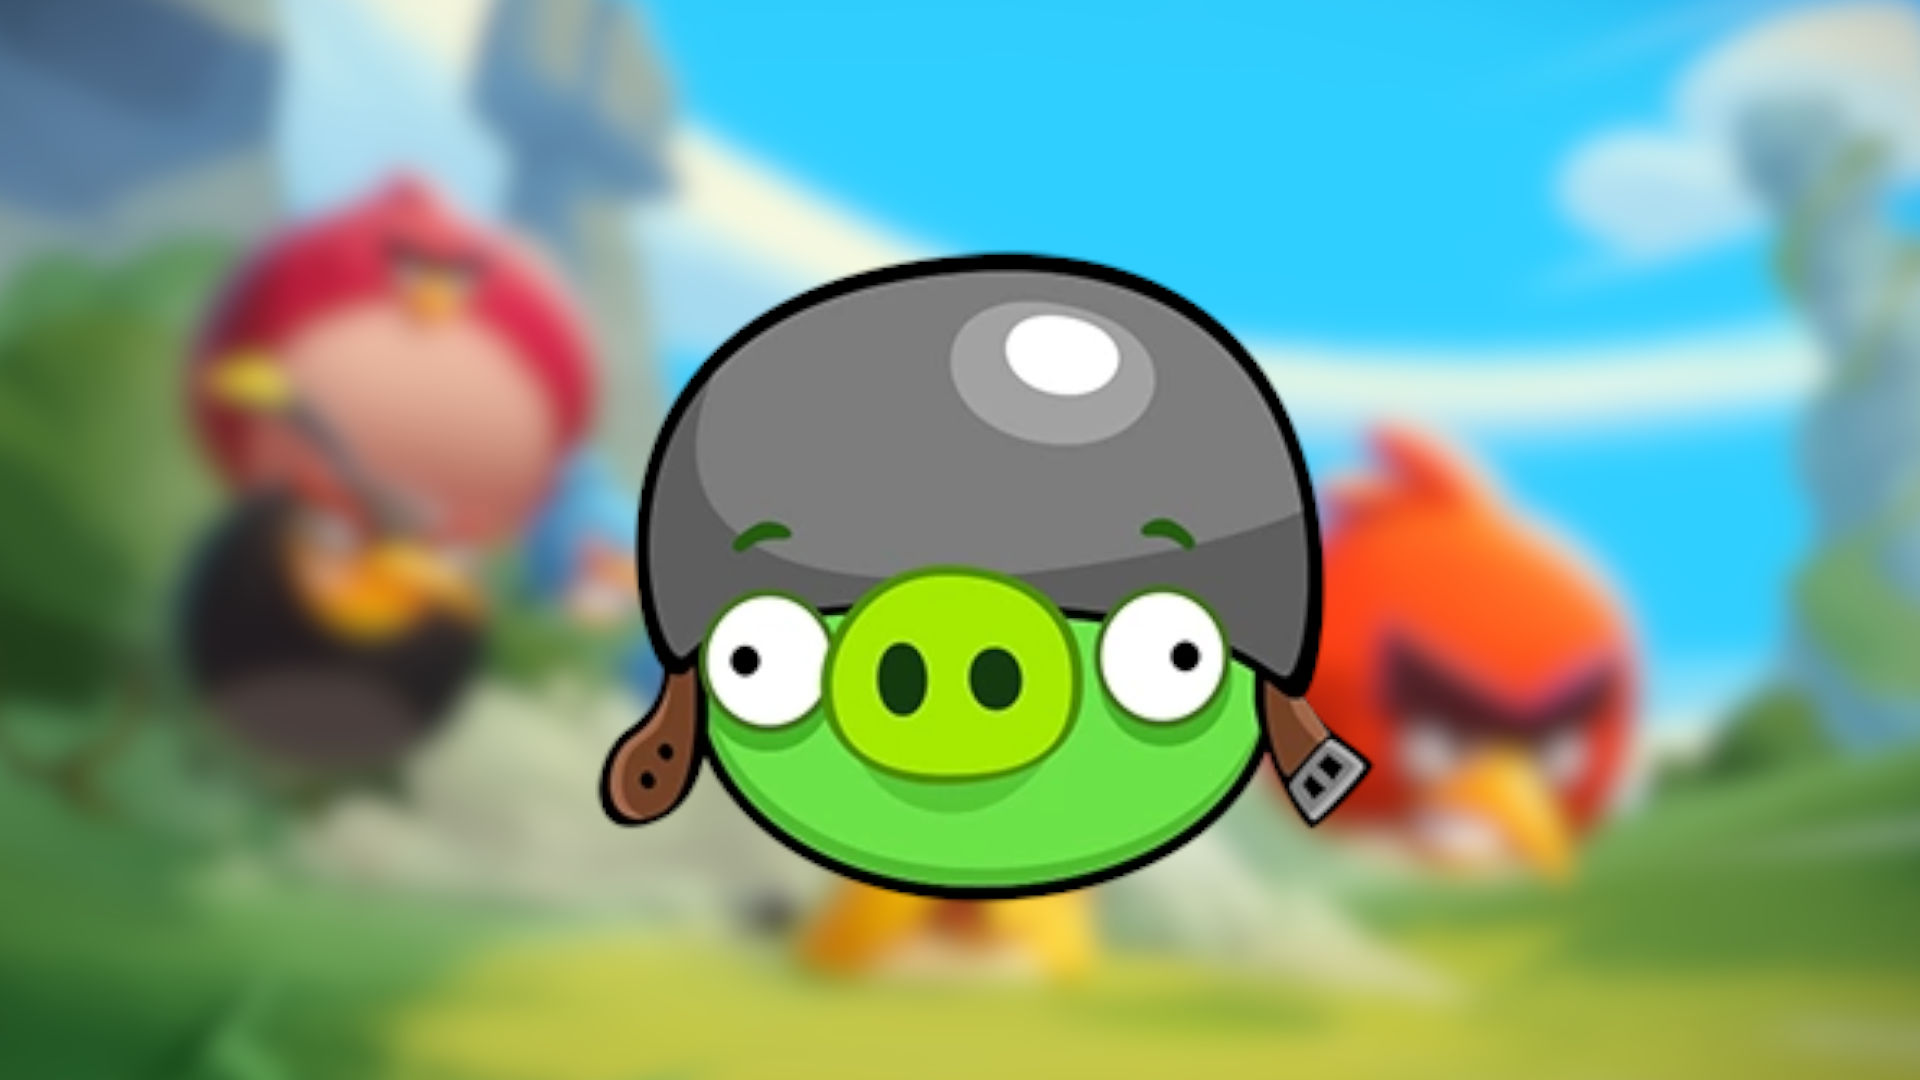 Angry Birds character Corporal Pig